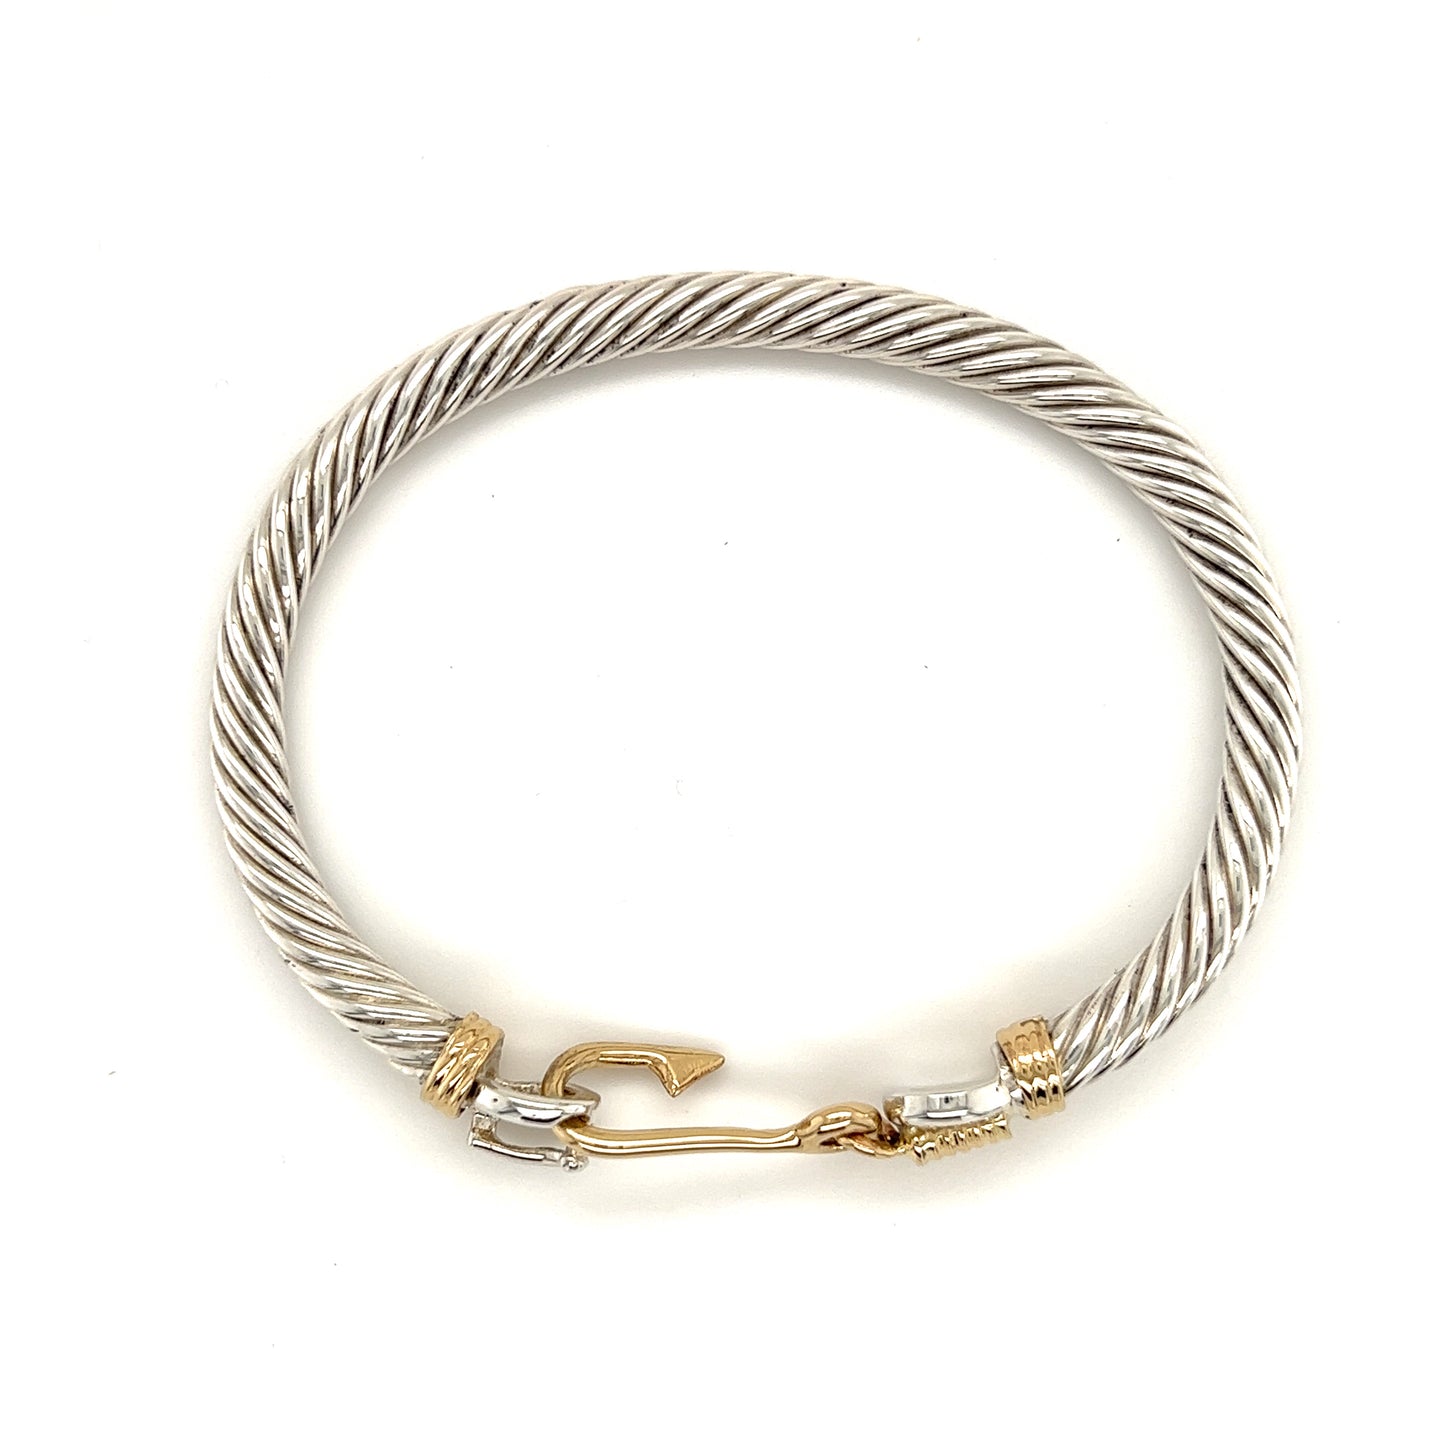 Fish Hook Cable Bangle Bracelet with 14K Wraps and Clasp in Sterling Silver Top View